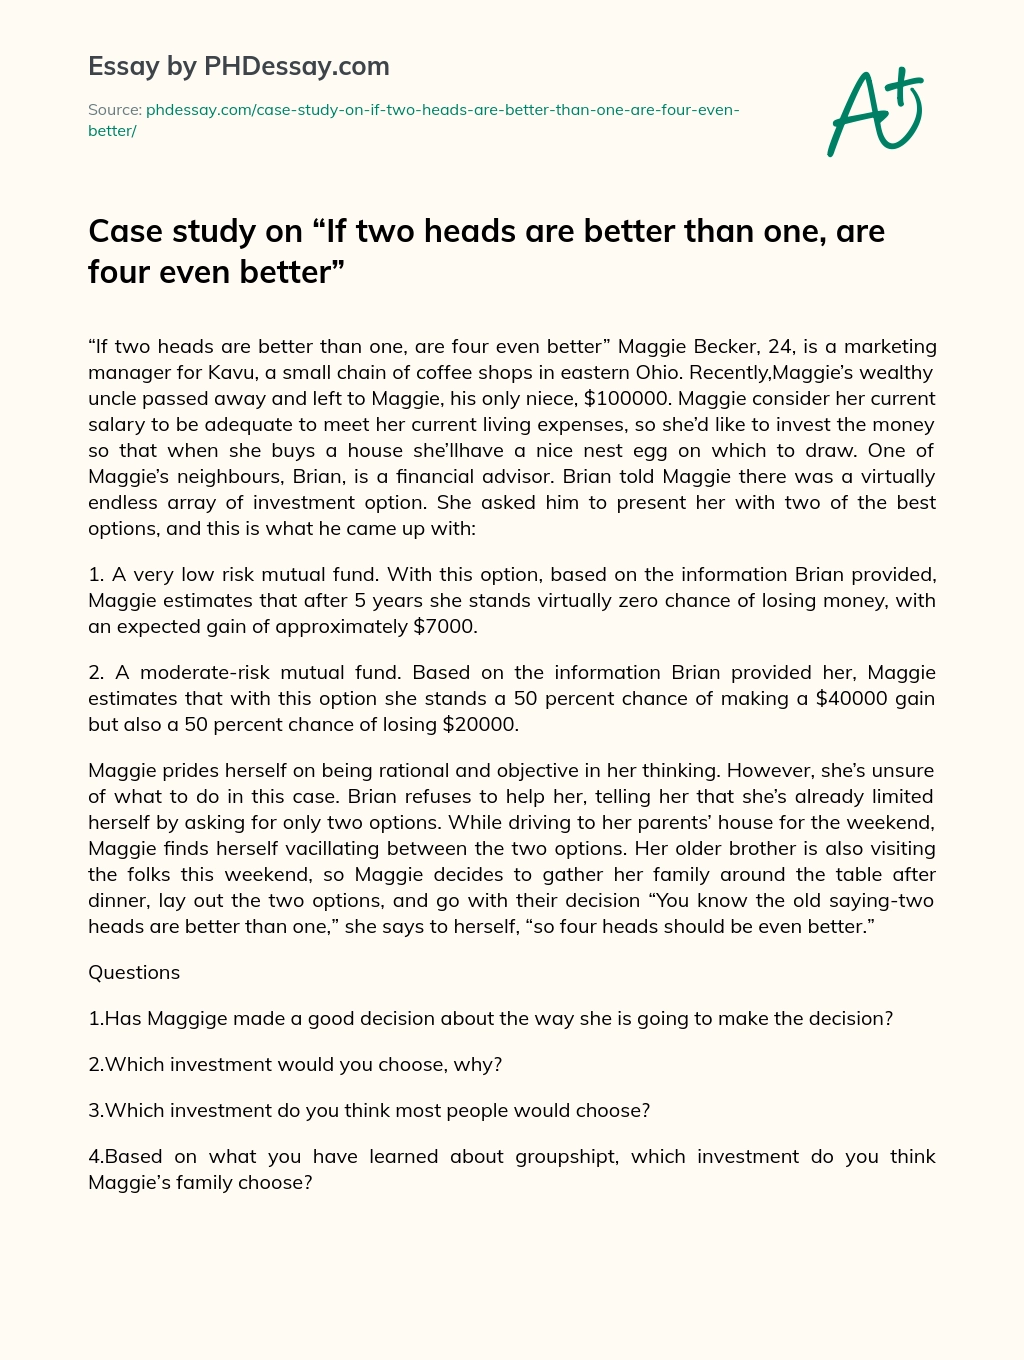 Case study on “If two heads are better than one, are four even better” essay